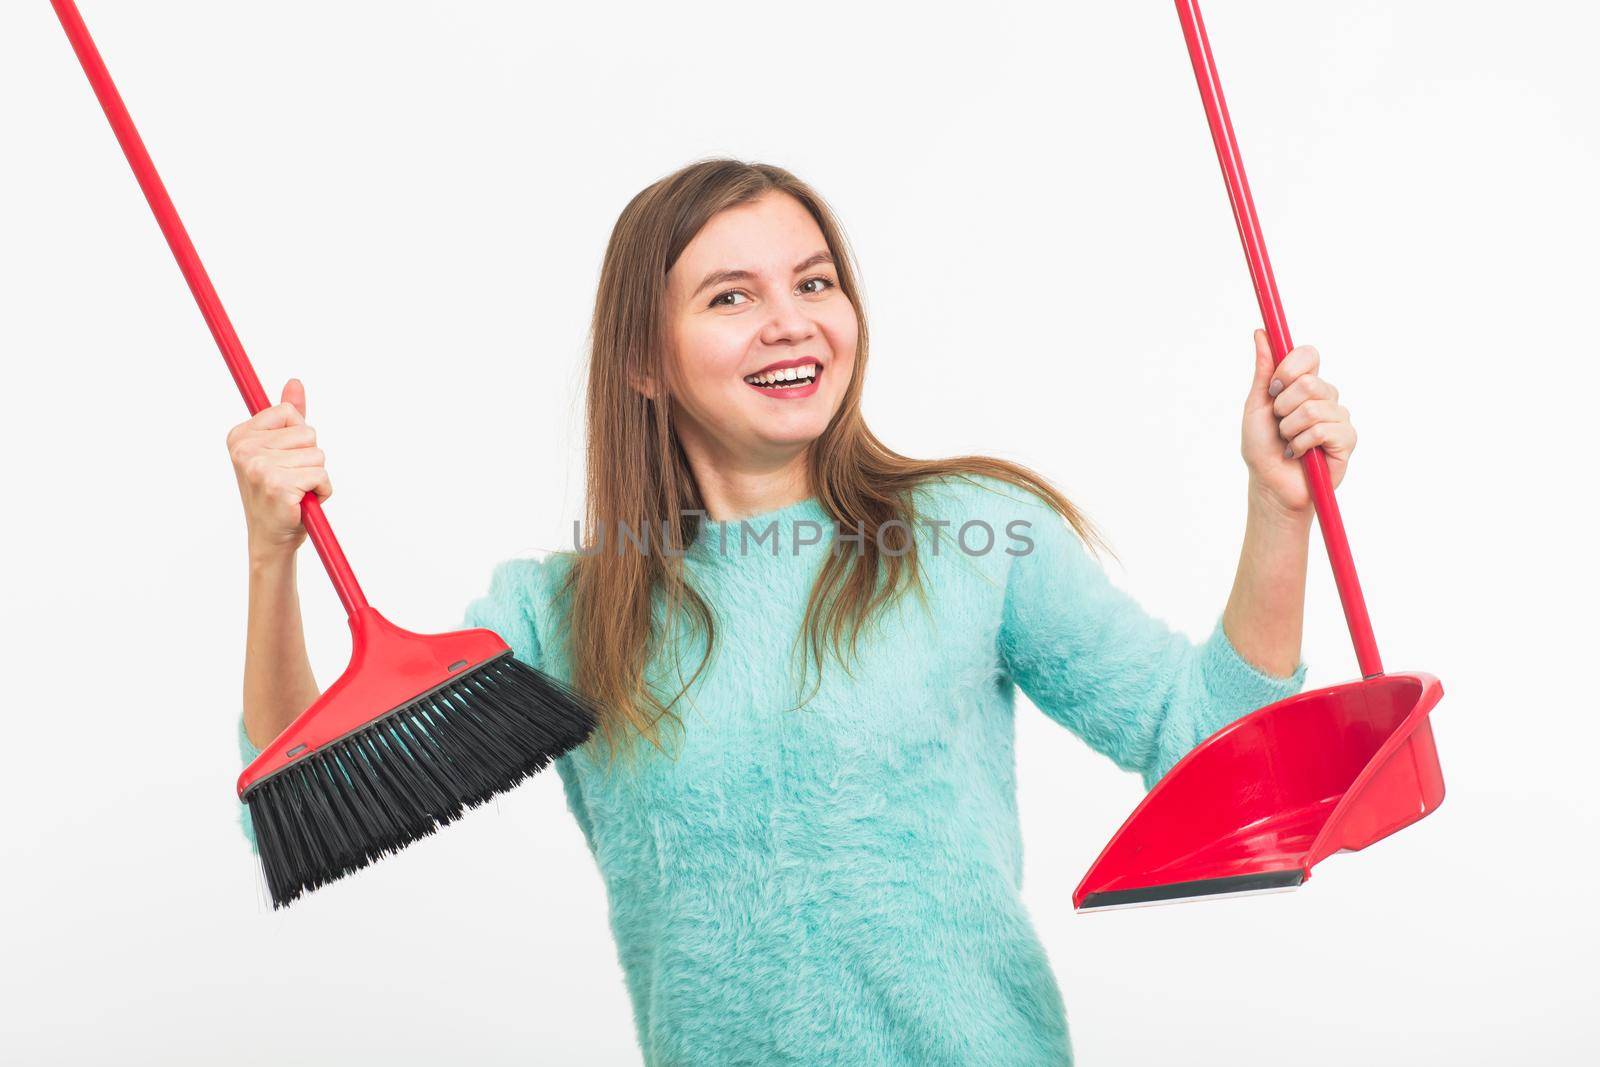 Funny Cleaning women happy excited during cleaning. isolated on white background by Satura86